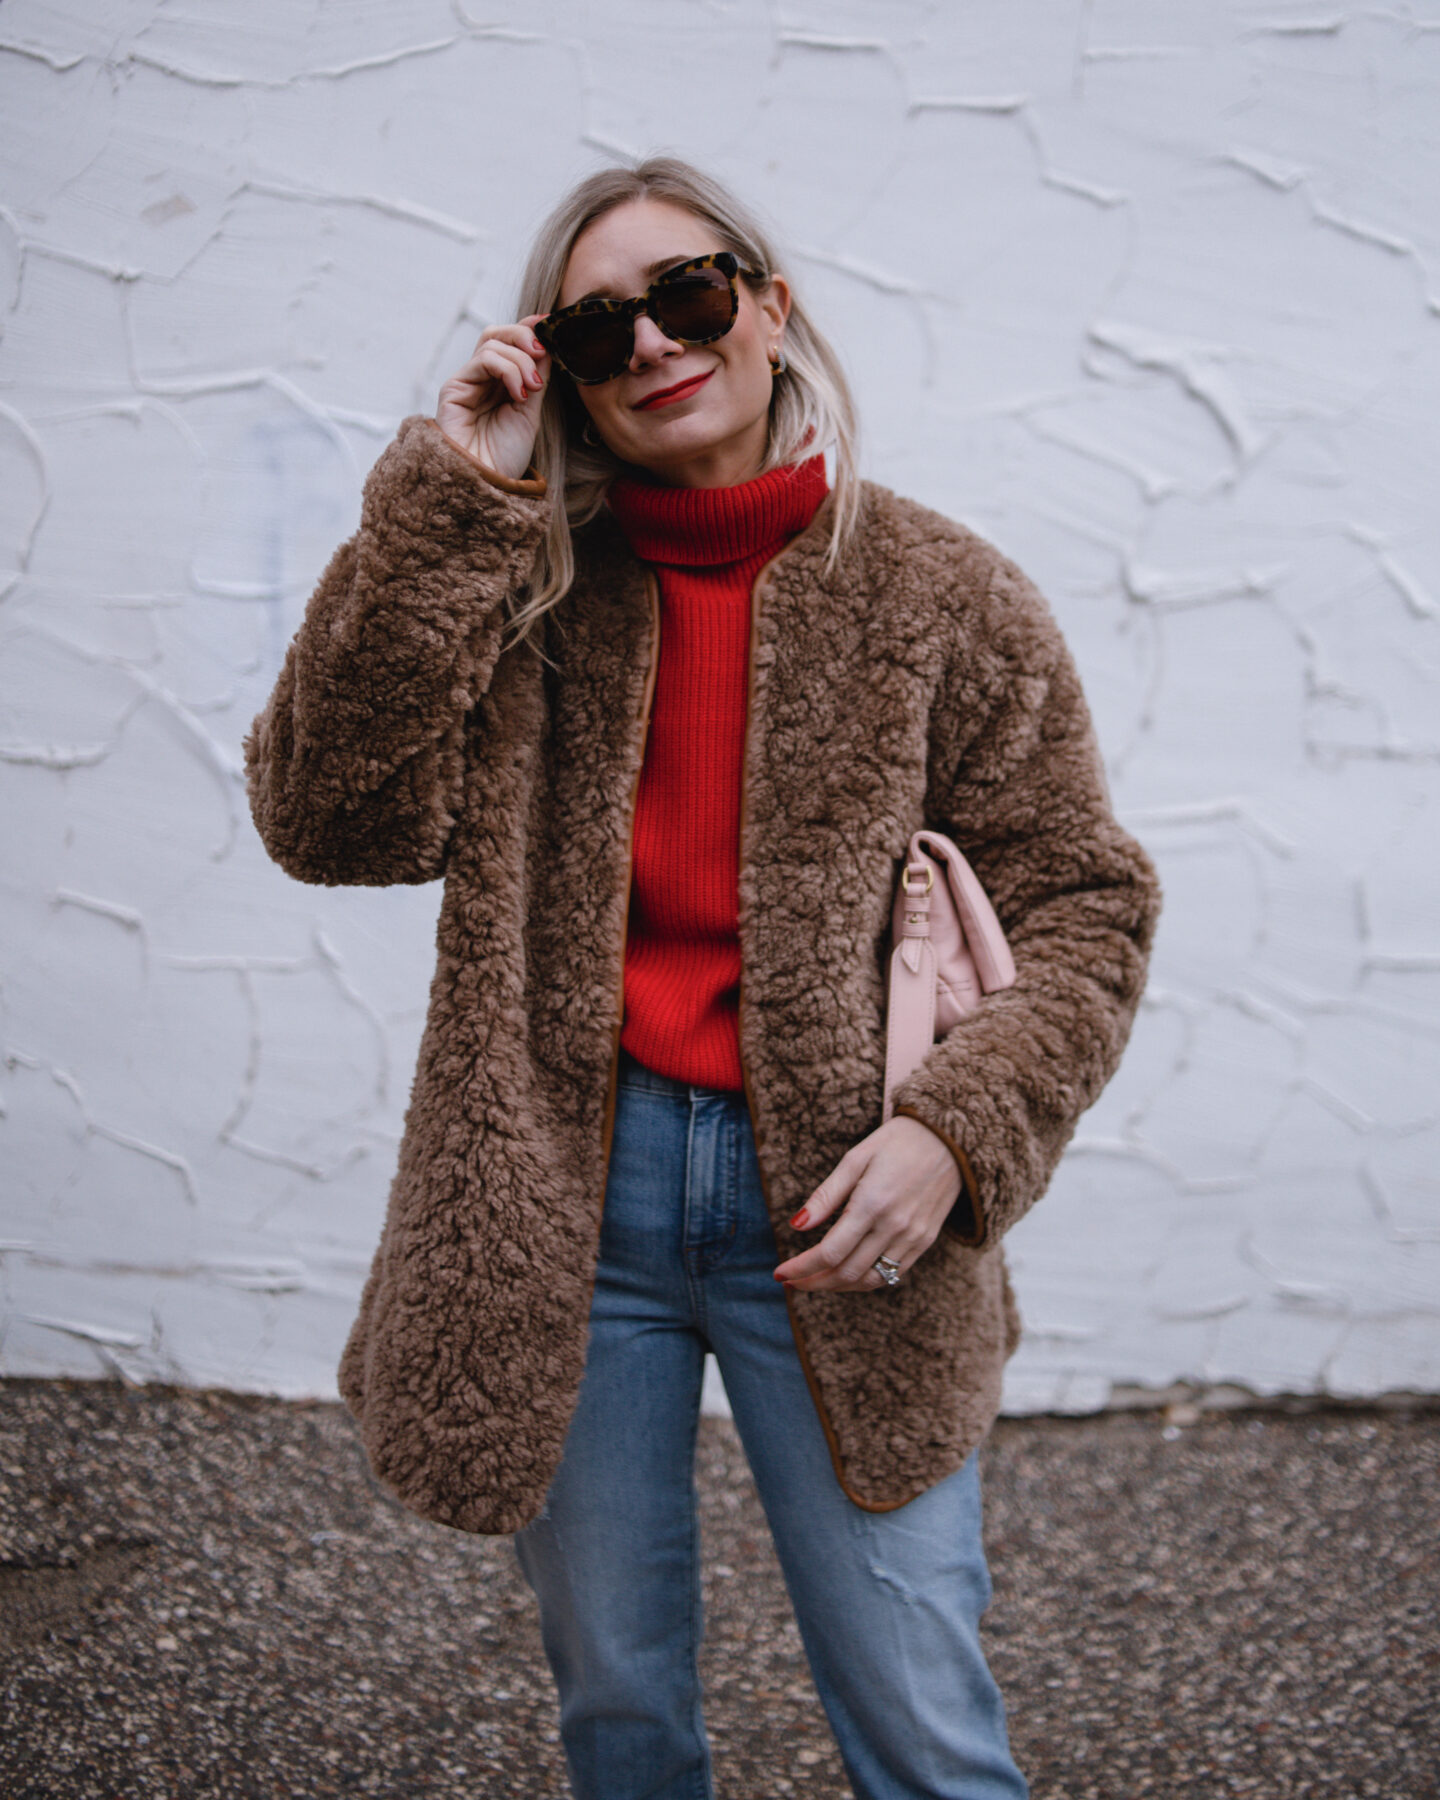 Karin Emily wears a red cashmere sweater, camel colored sherpa coat, and mid wash straight leg jeans